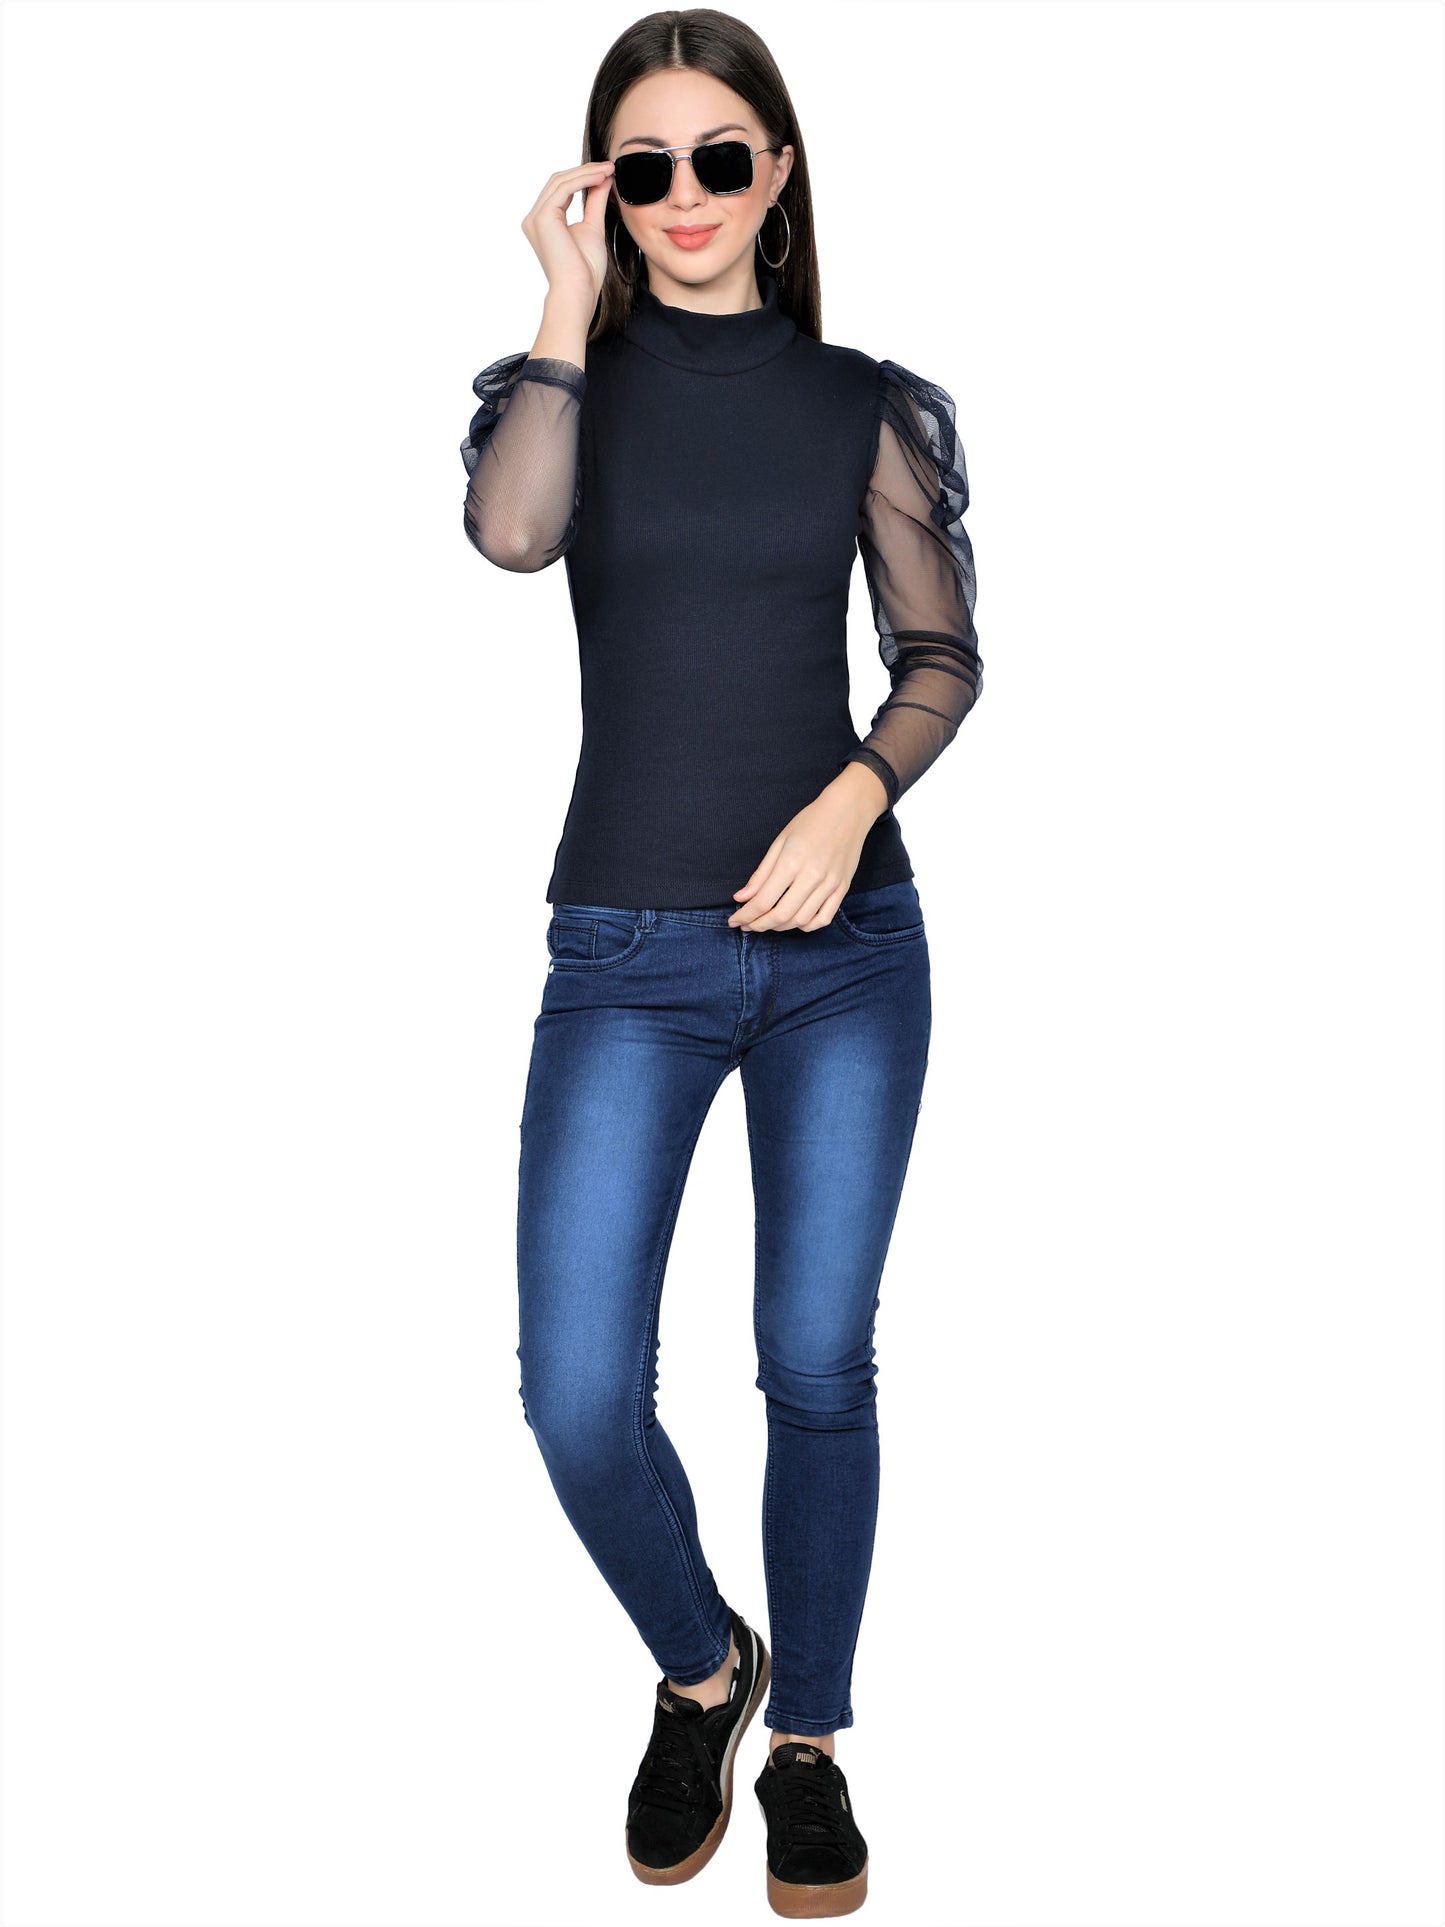 Women Roll-Up with Net Sleeves Ribbed Solid Navy Blue High Neck Tops Turtle Neck Top for Women